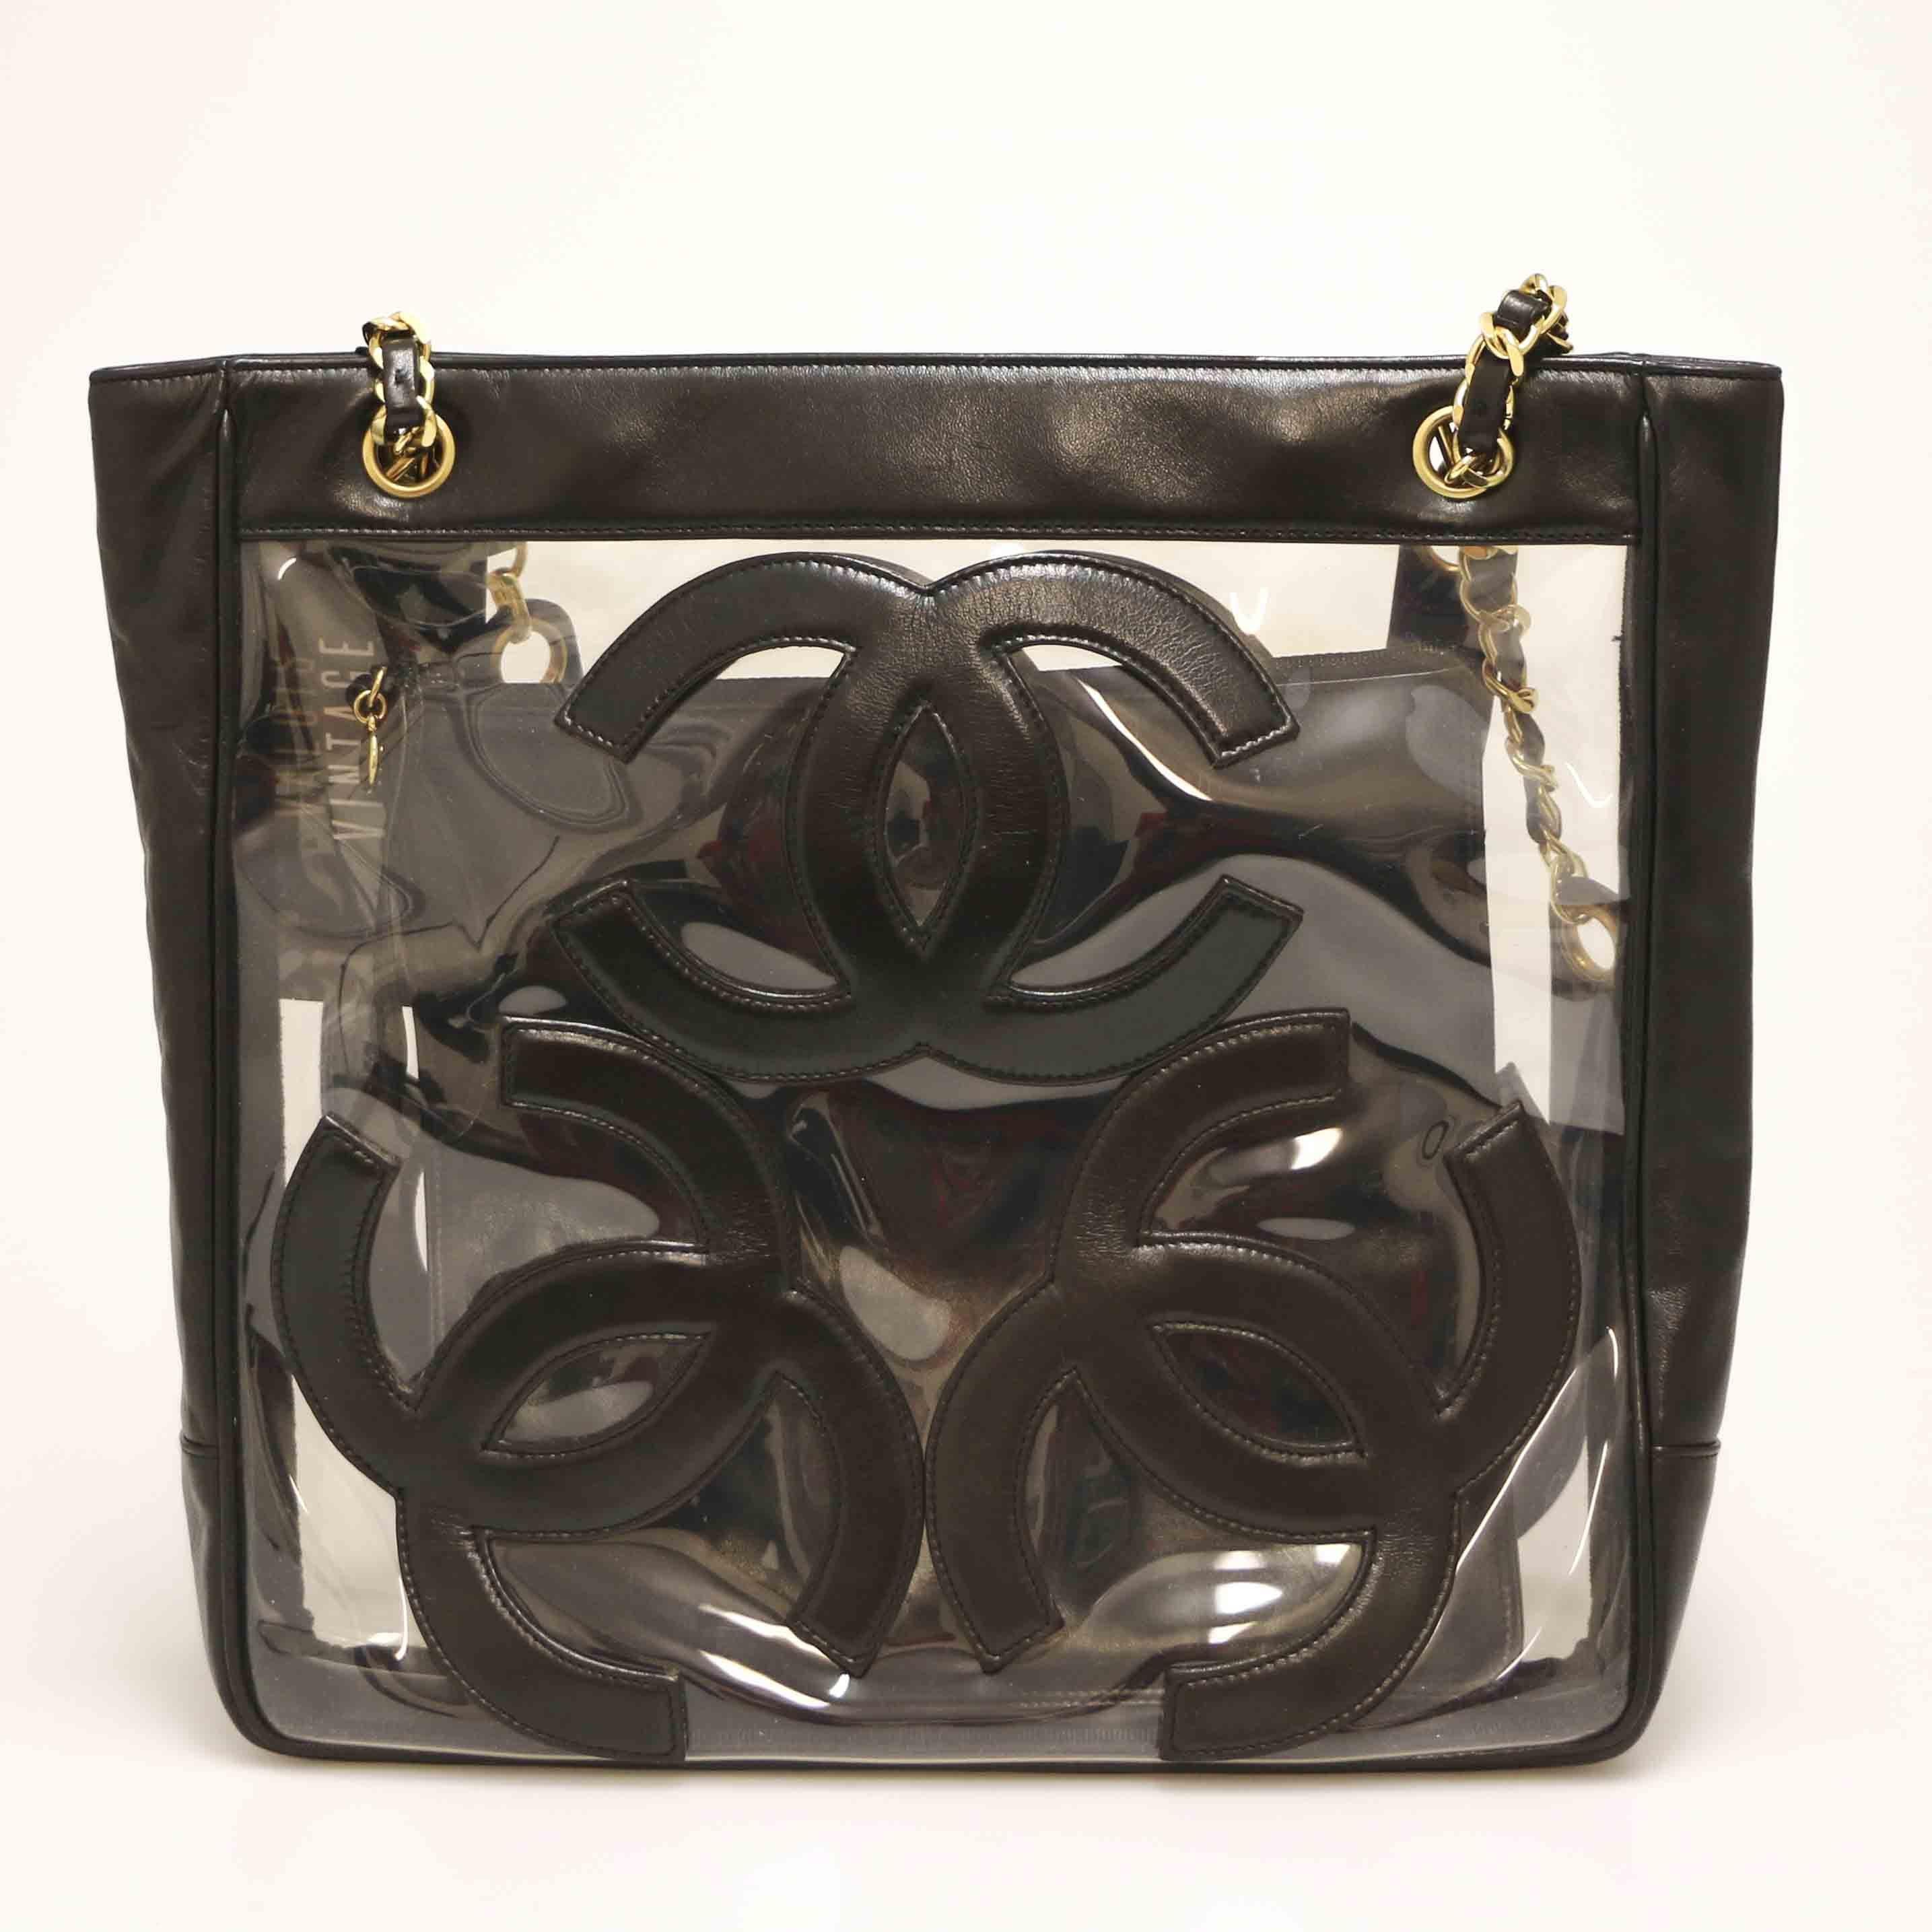 CHANEL Vintage Tote Bag in PVC and Leather. Magnetic snap clasp. The hardware is in gilt metal. Golden metal and black leather shoulder strap.
Large black leather pouch attached to the inside of the bag.
In good condition. No trace on leather.
Made